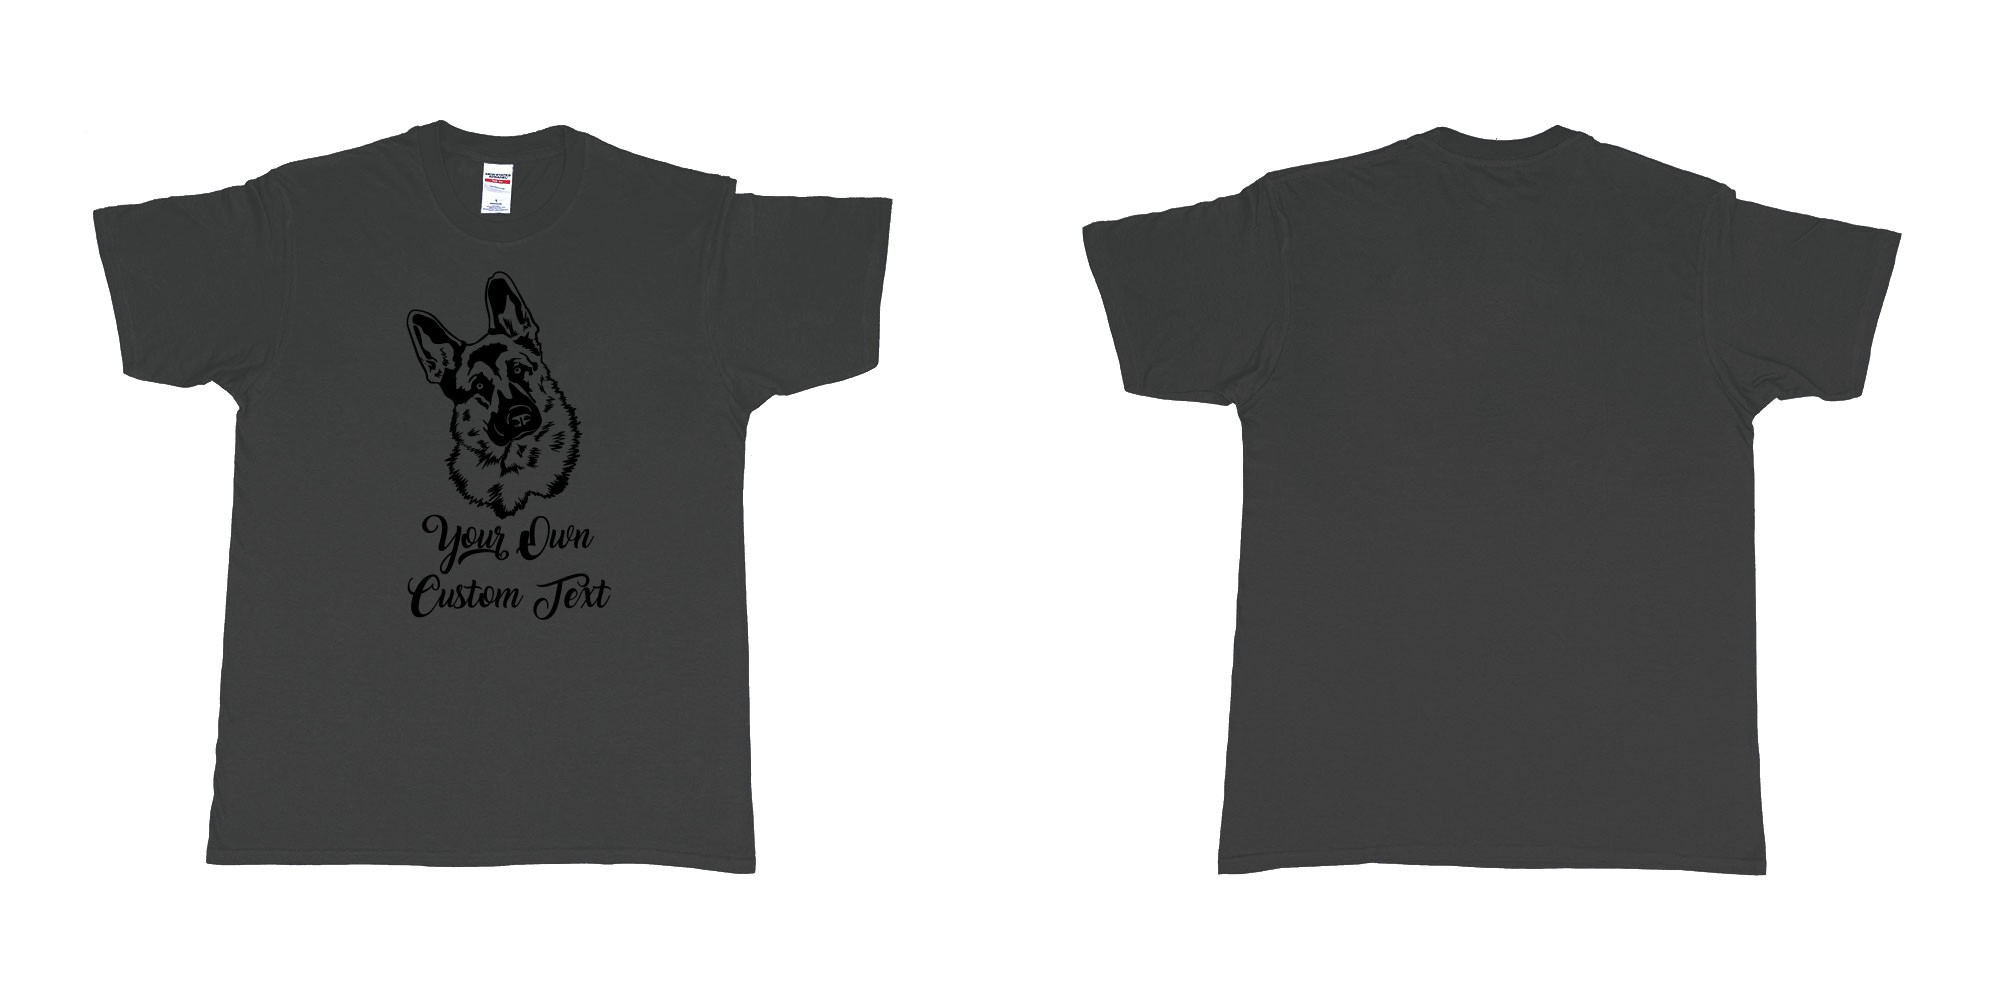 Custom tshirt design zack german shepherd tilts its head your own custom text in fabric color black choice your own text made in Bali by The Pirate Way